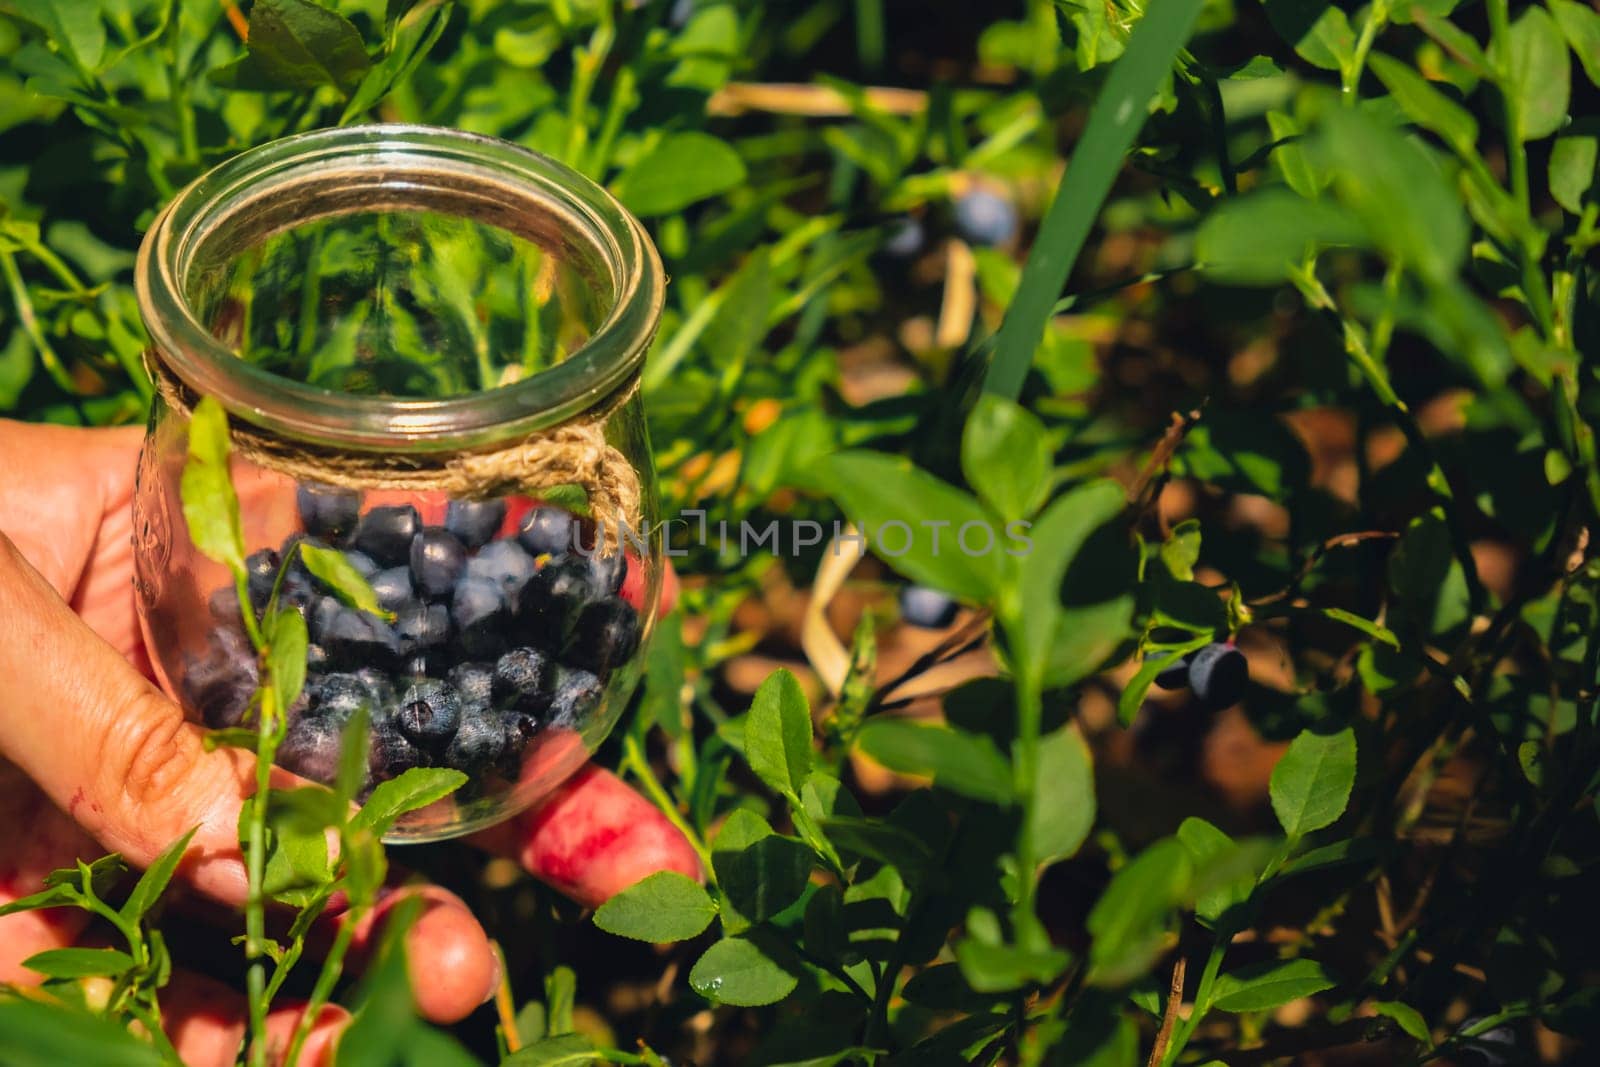 Man picking berries, process of collecting harvesting into glass jar in the forest. Bush of ripe wild blackberry in summer. Concept of organic locally grown blueberries, Seasonal bilberry countryside eco friendly